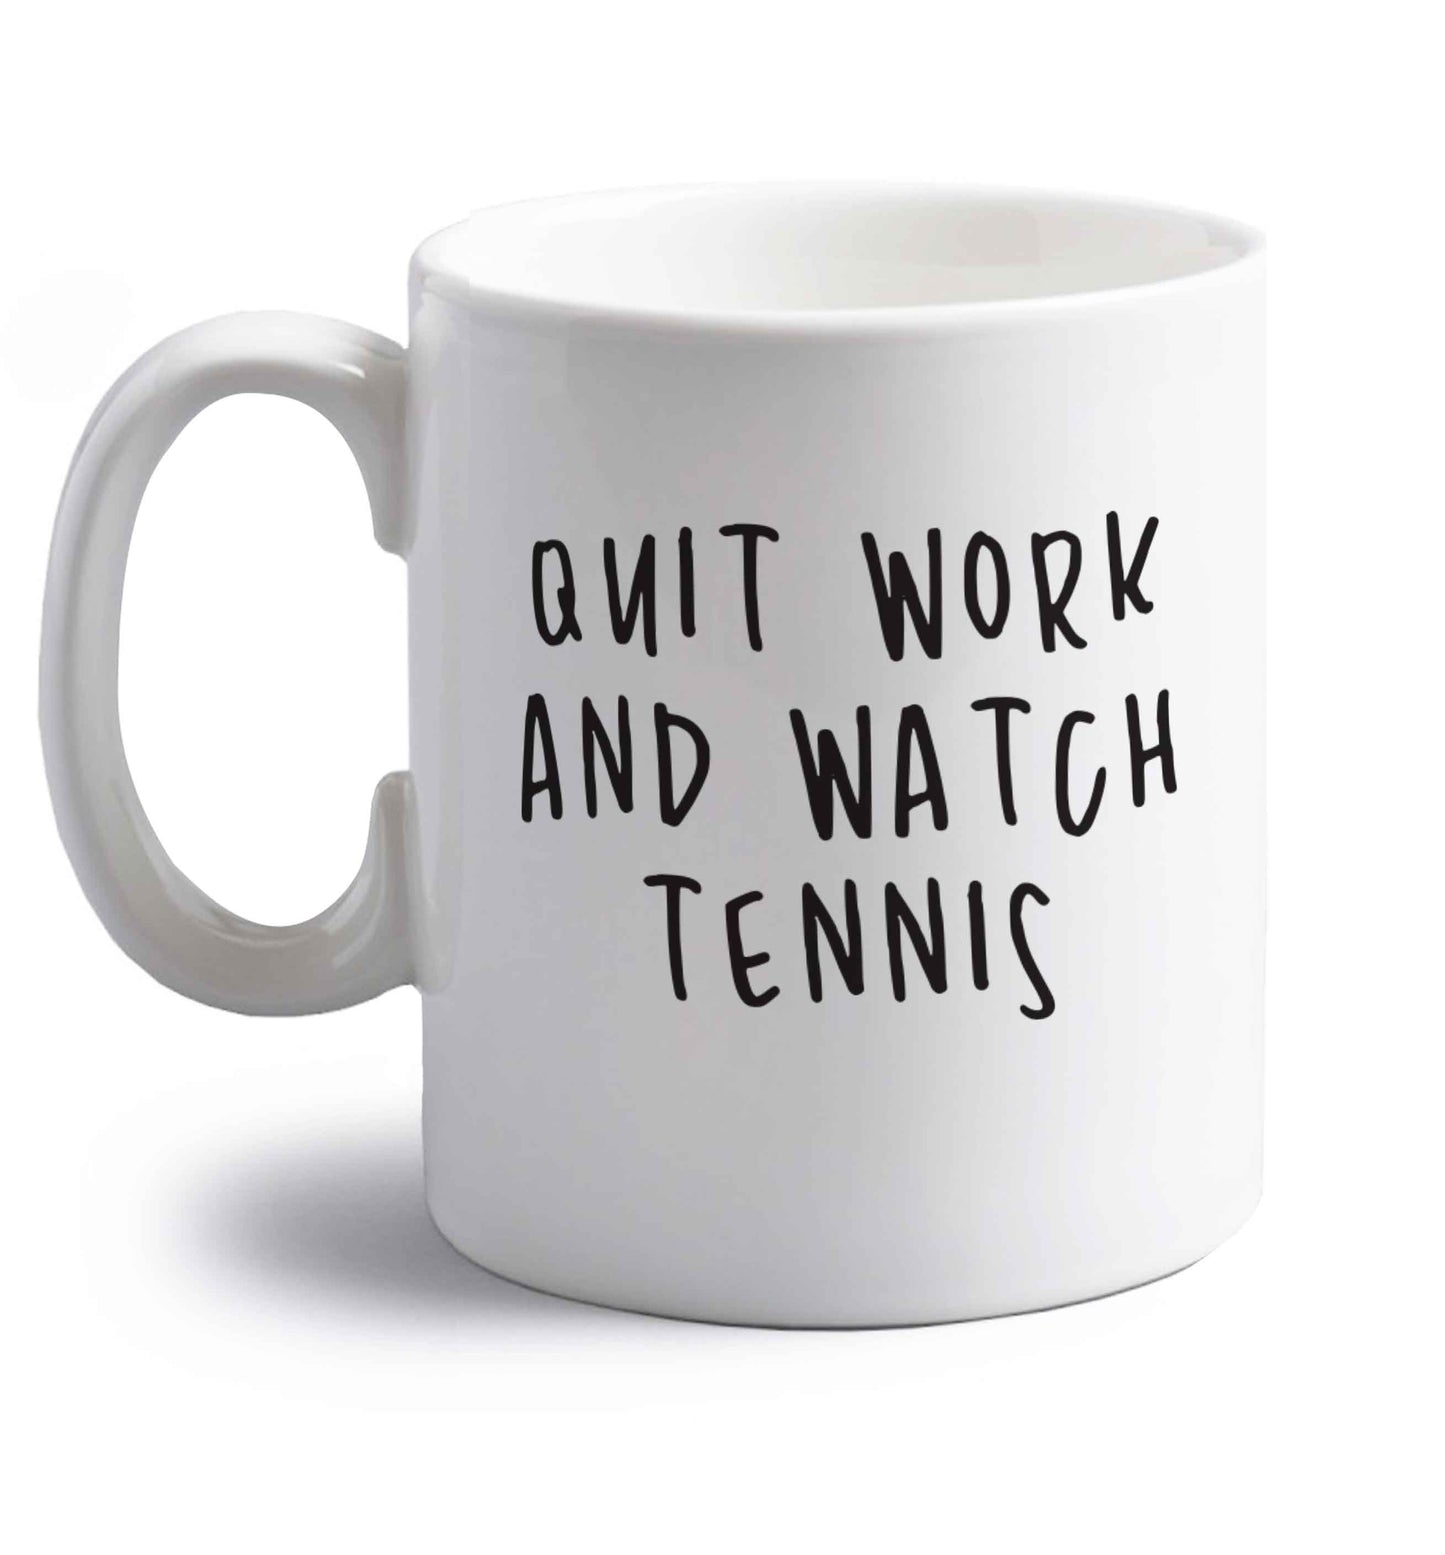 Quit work and watch tennis right handed white ceramic mug 